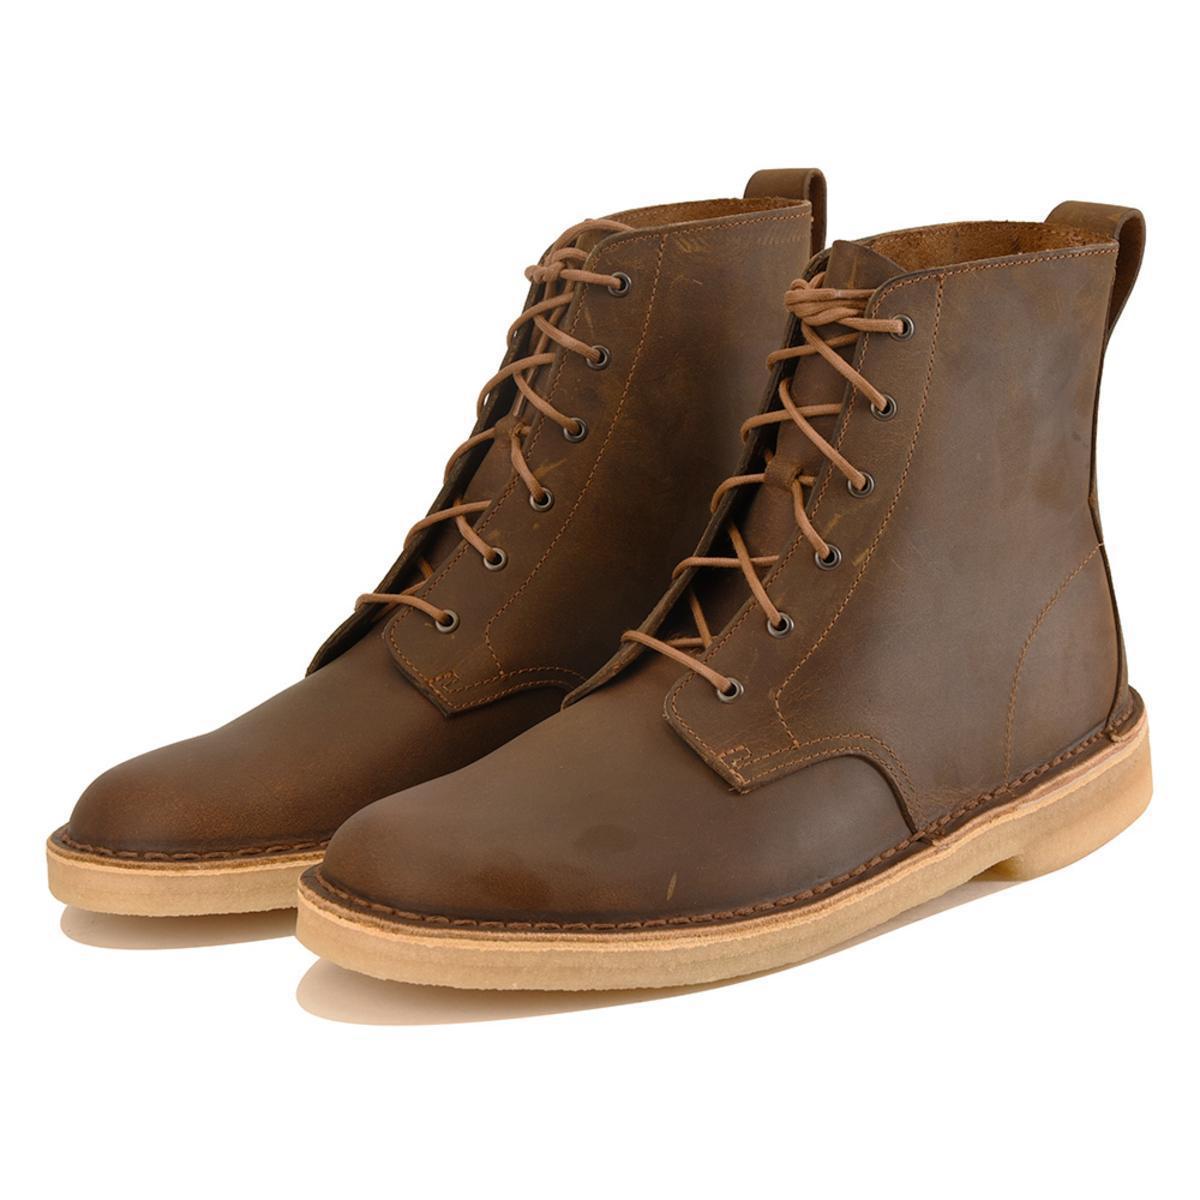 Clarks Leather Desert Mali Beeswax Boot 